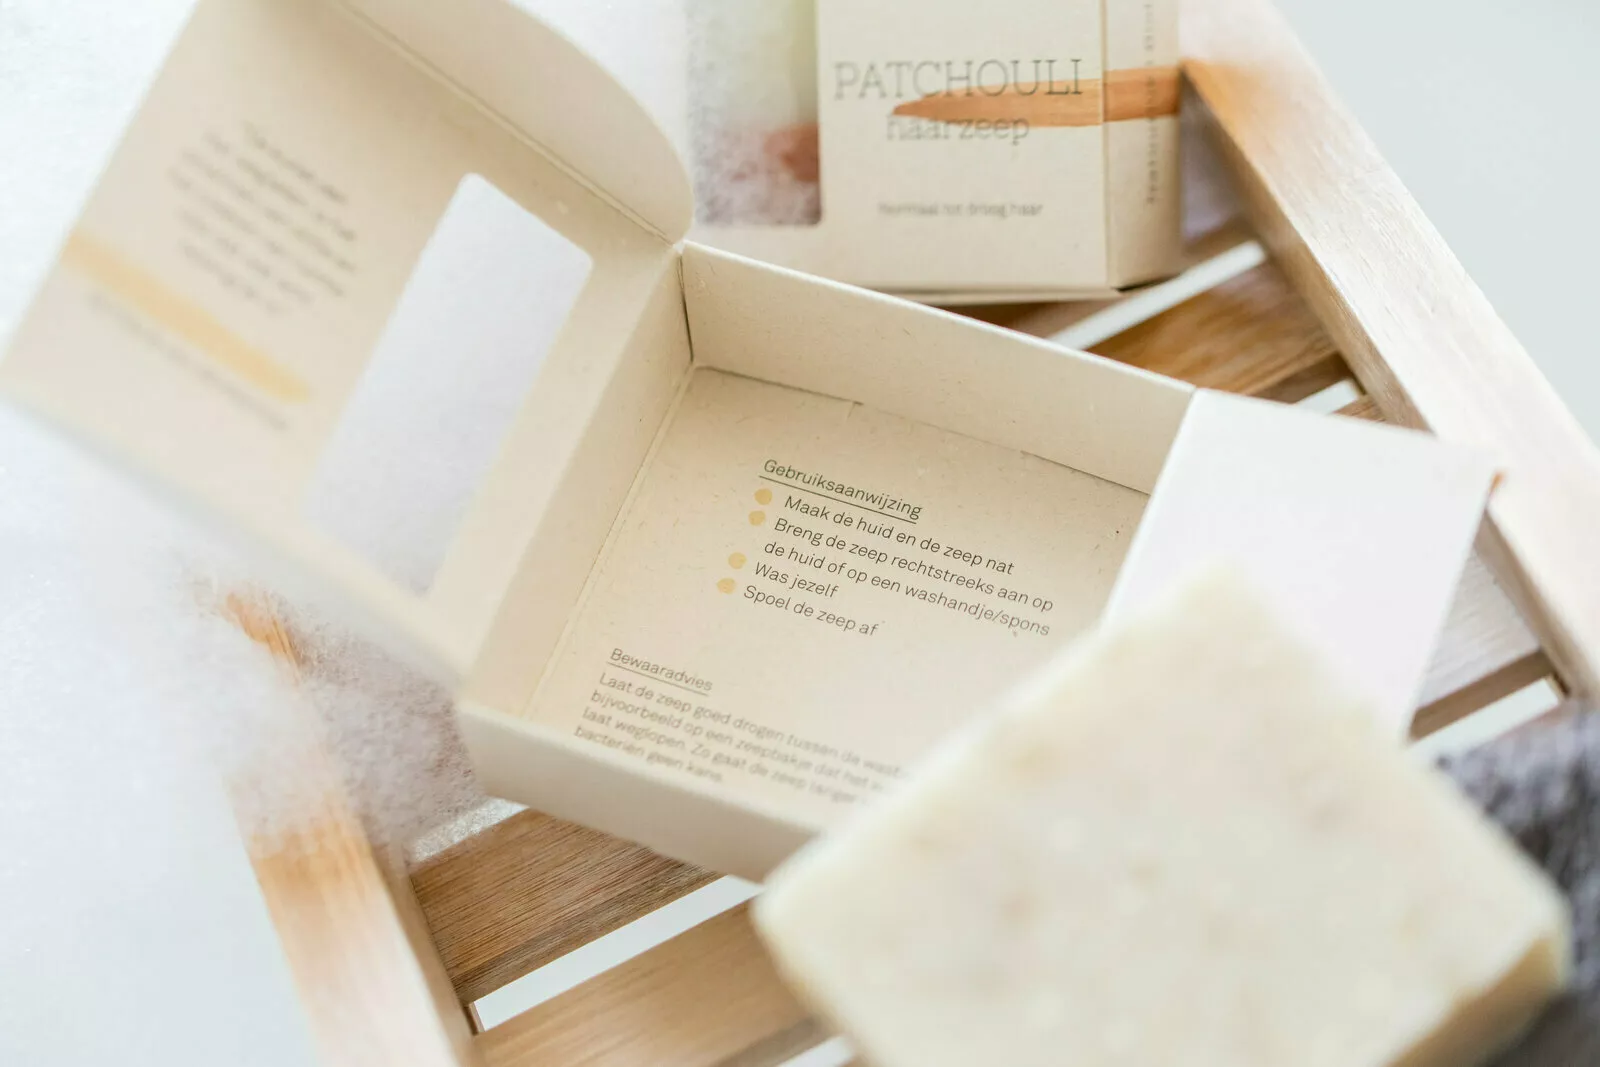 PaperWise eco friendly paper sustainablesoap bar box packaging BotmaenvanBennekom8